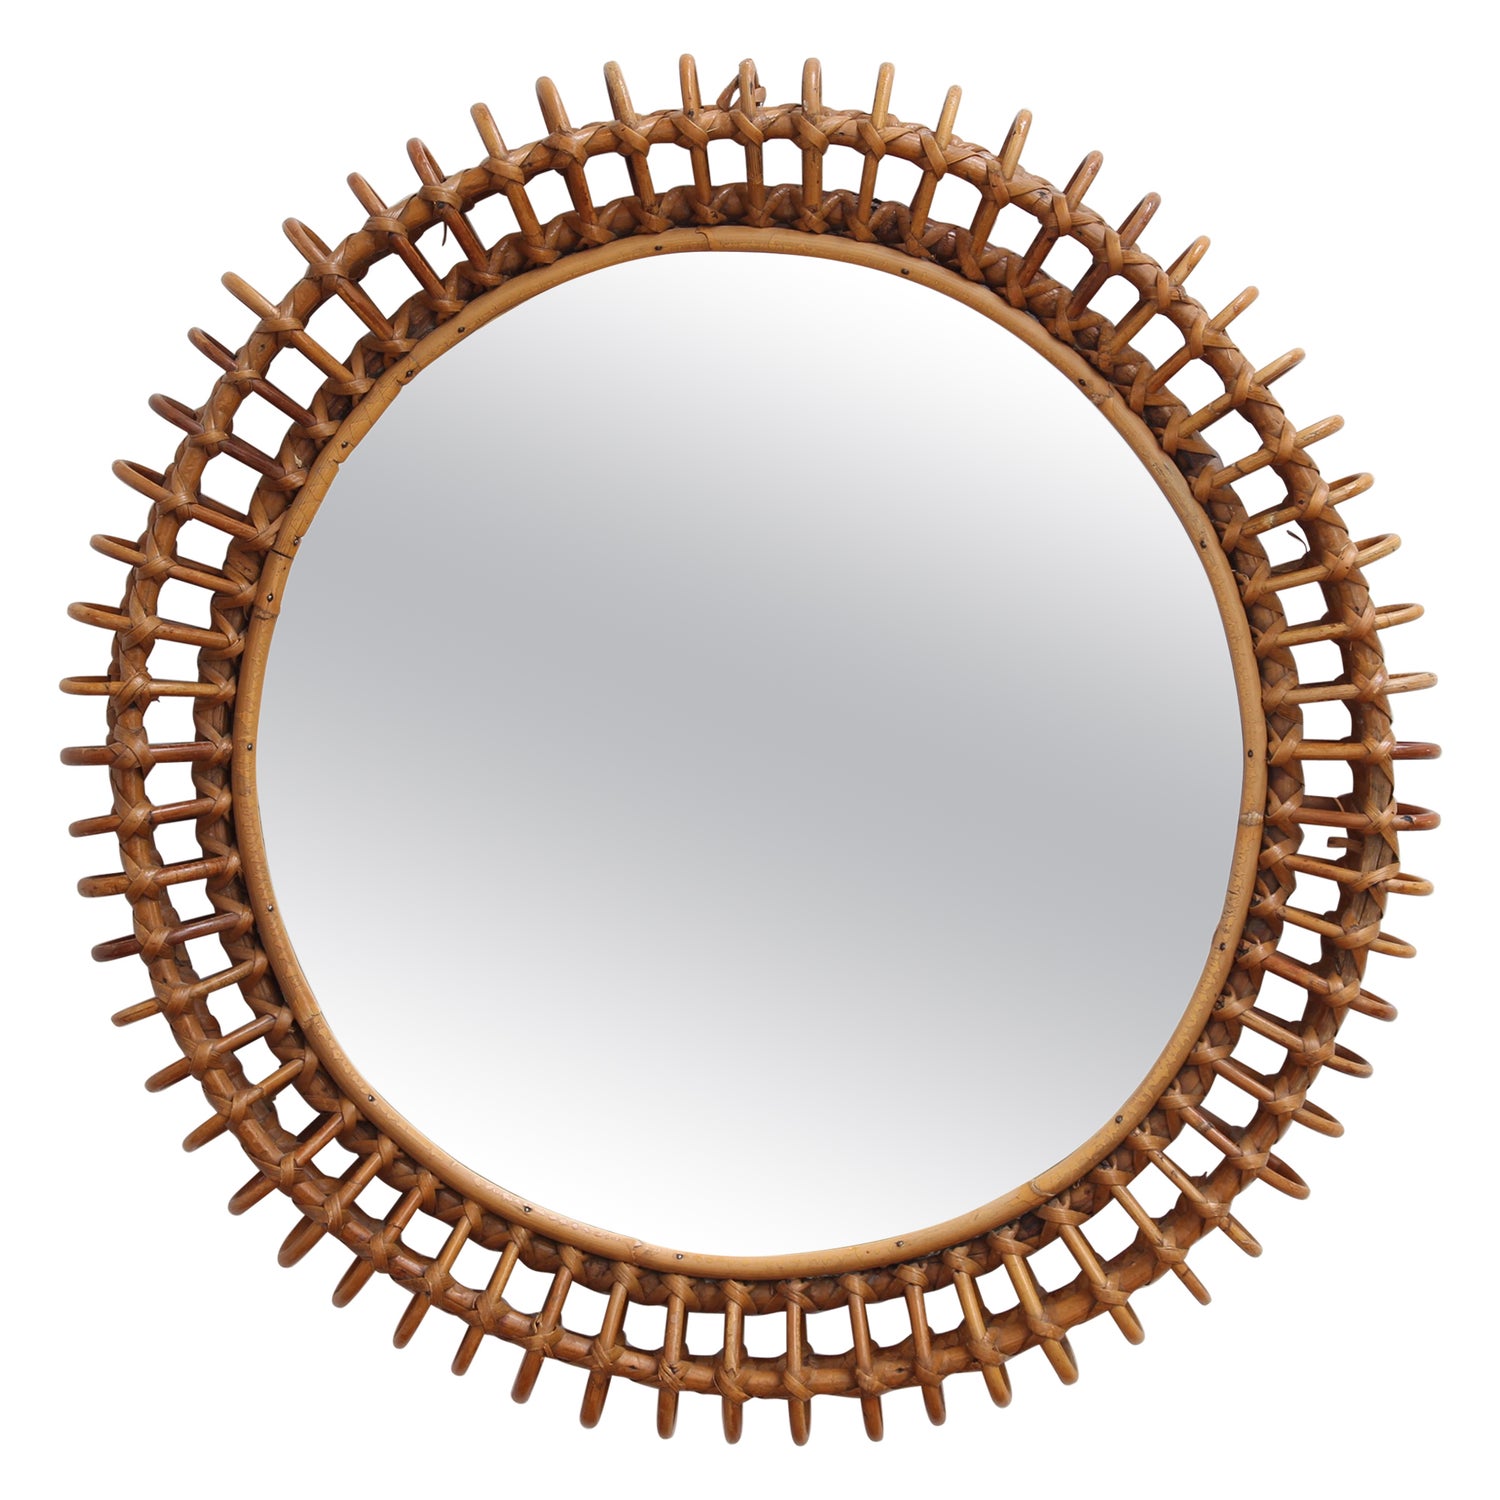 Rattan Oval Flower Mirror from France, 1960s at 1stDibs